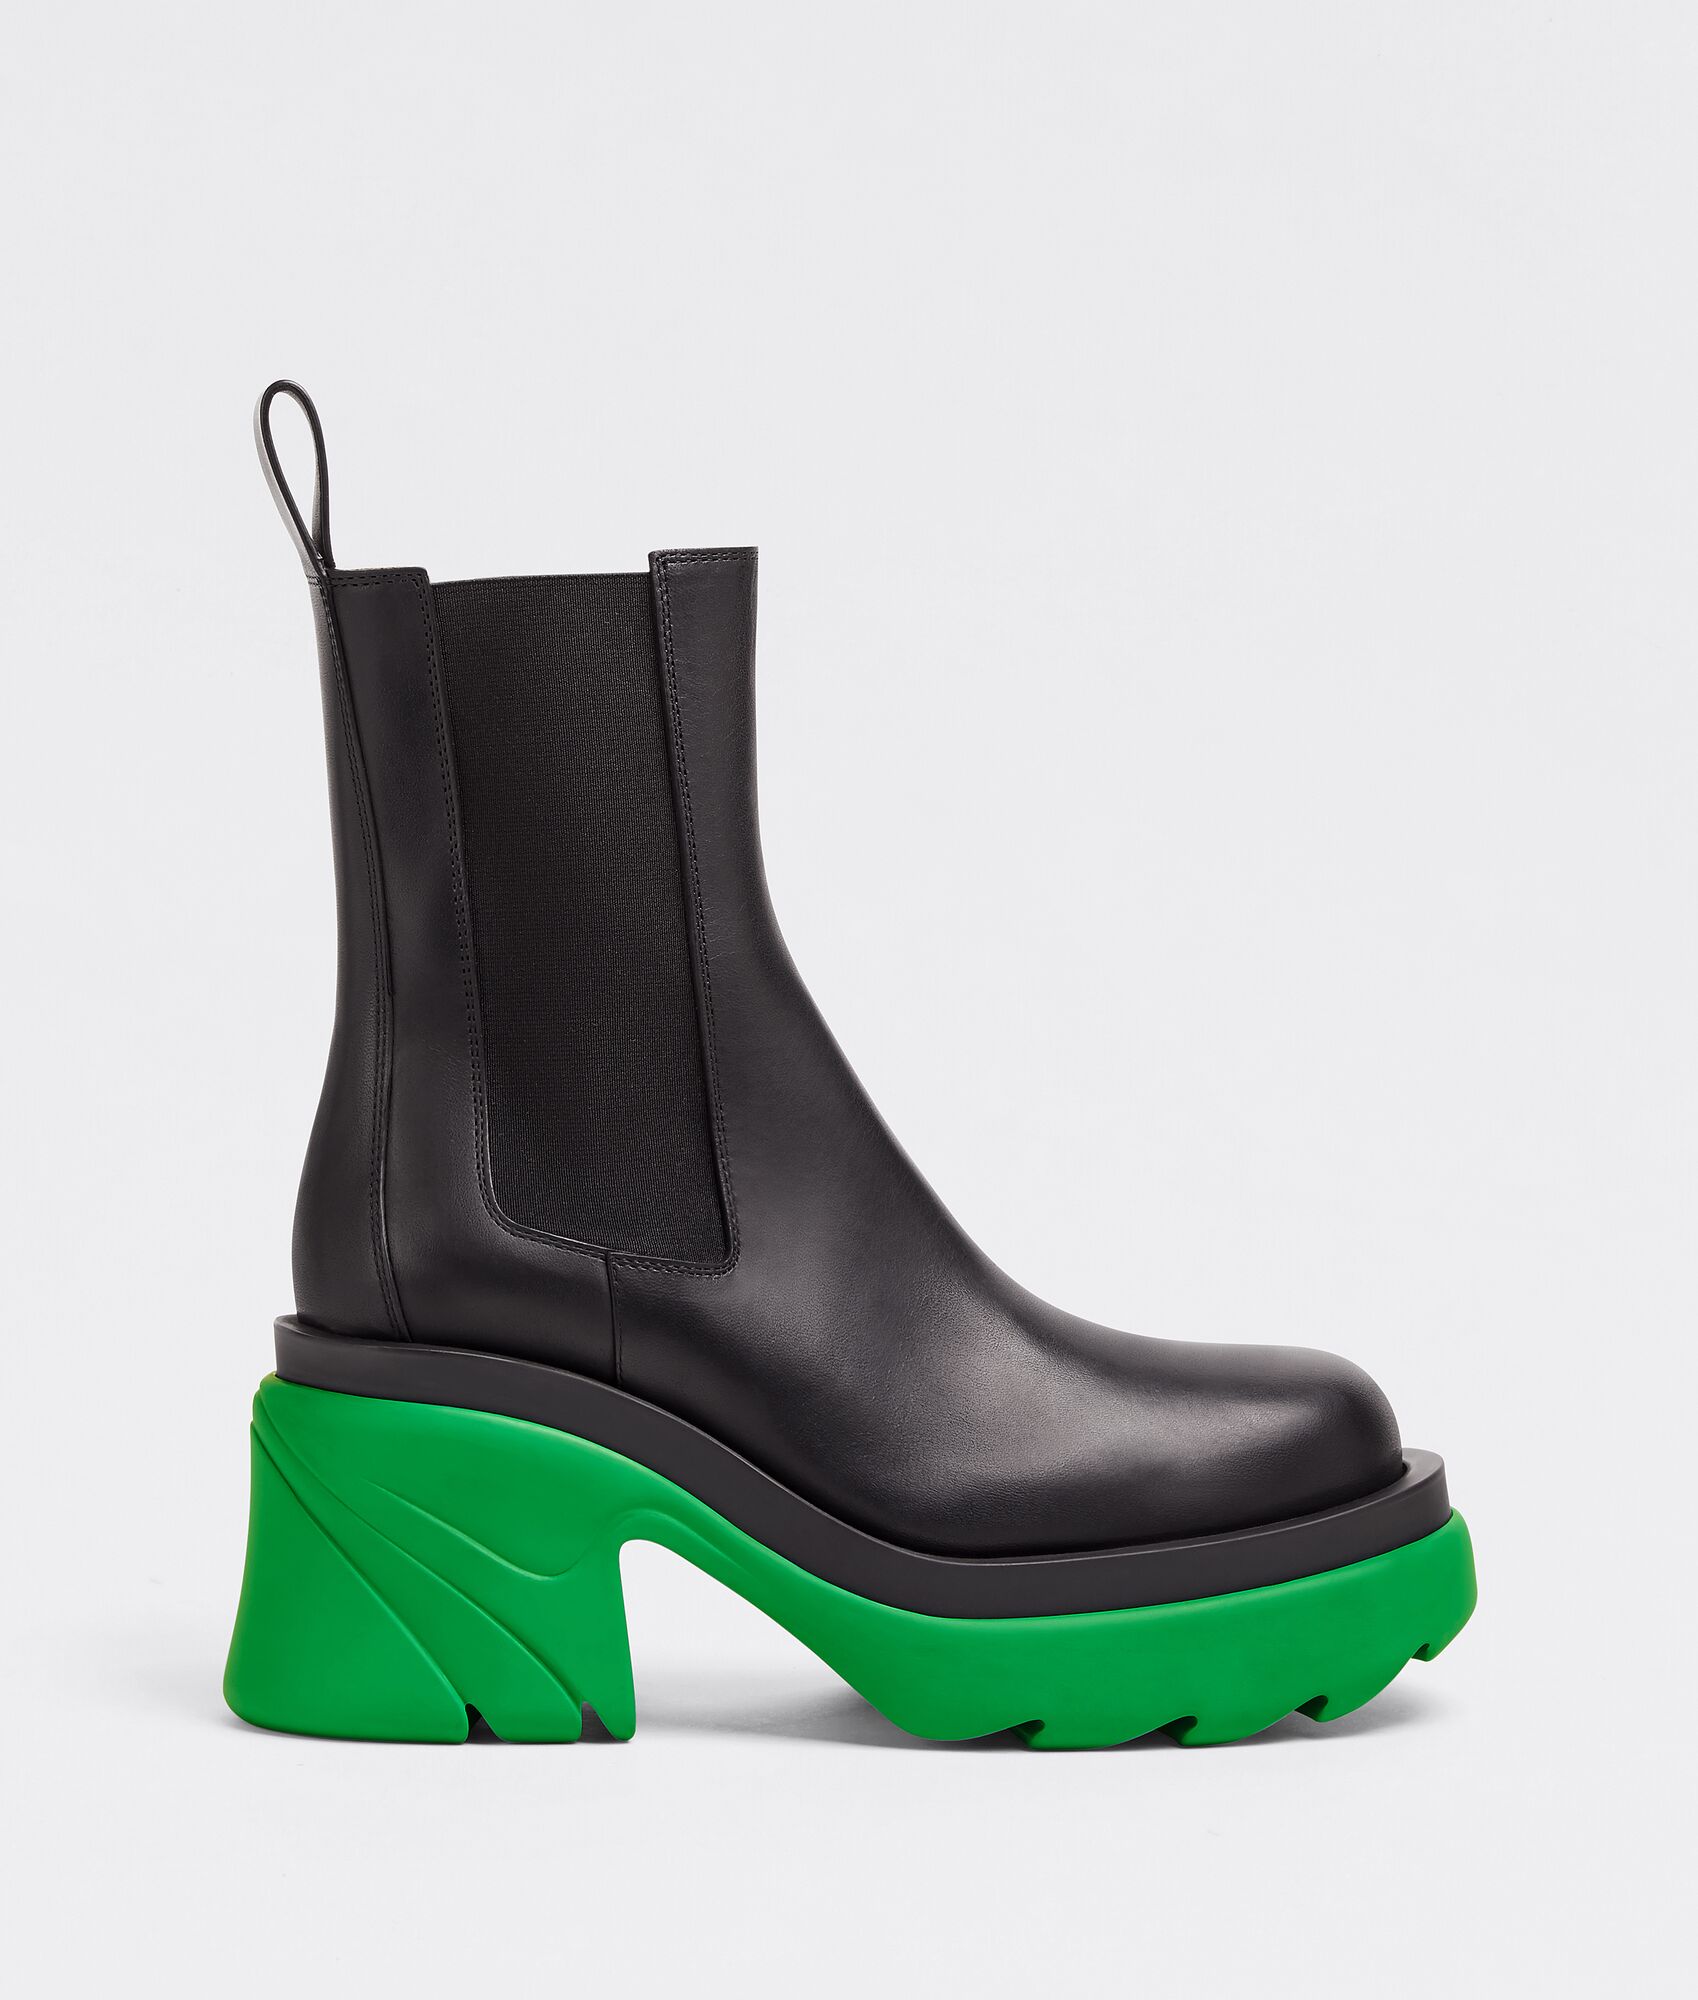 Can You Stand The Rain? With These 15 Luxury Rubber Boots You Certainly Can